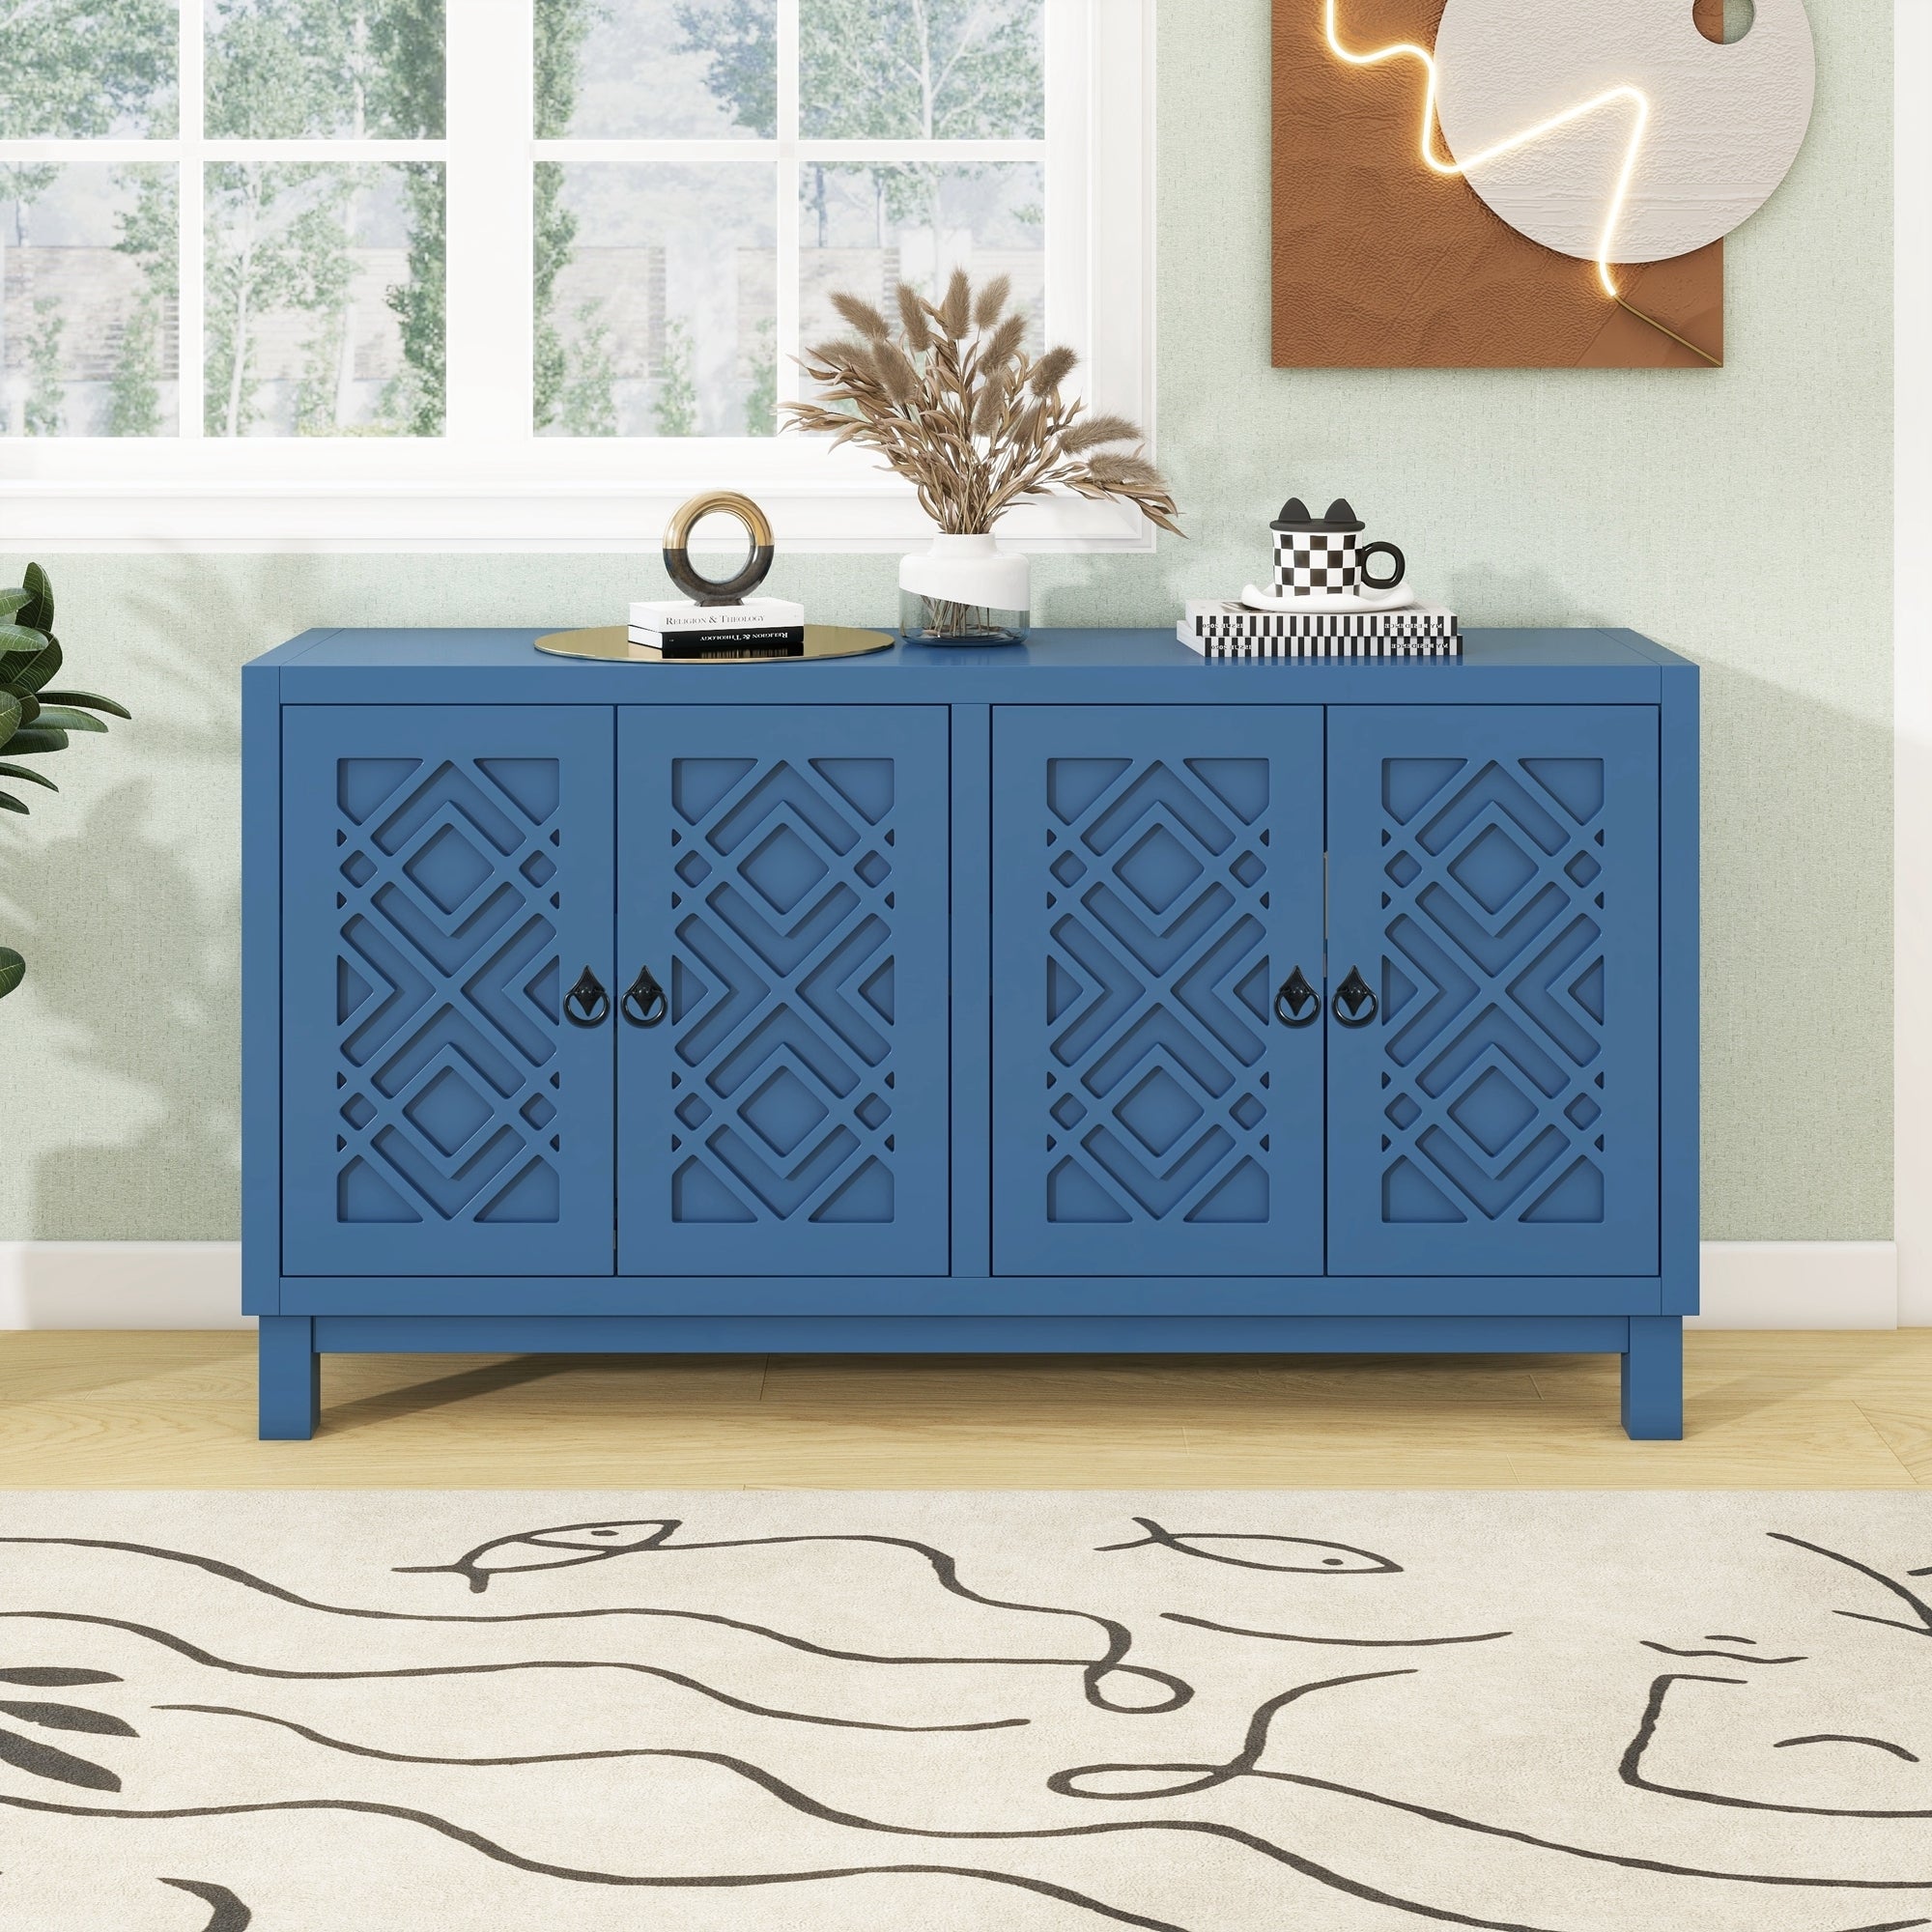 🆓🚛 Large Storage Space Sideboard, 4 Door Buffet Cabinet With Pull Ring Handles for Living Room, Dining Room, Navy Blue